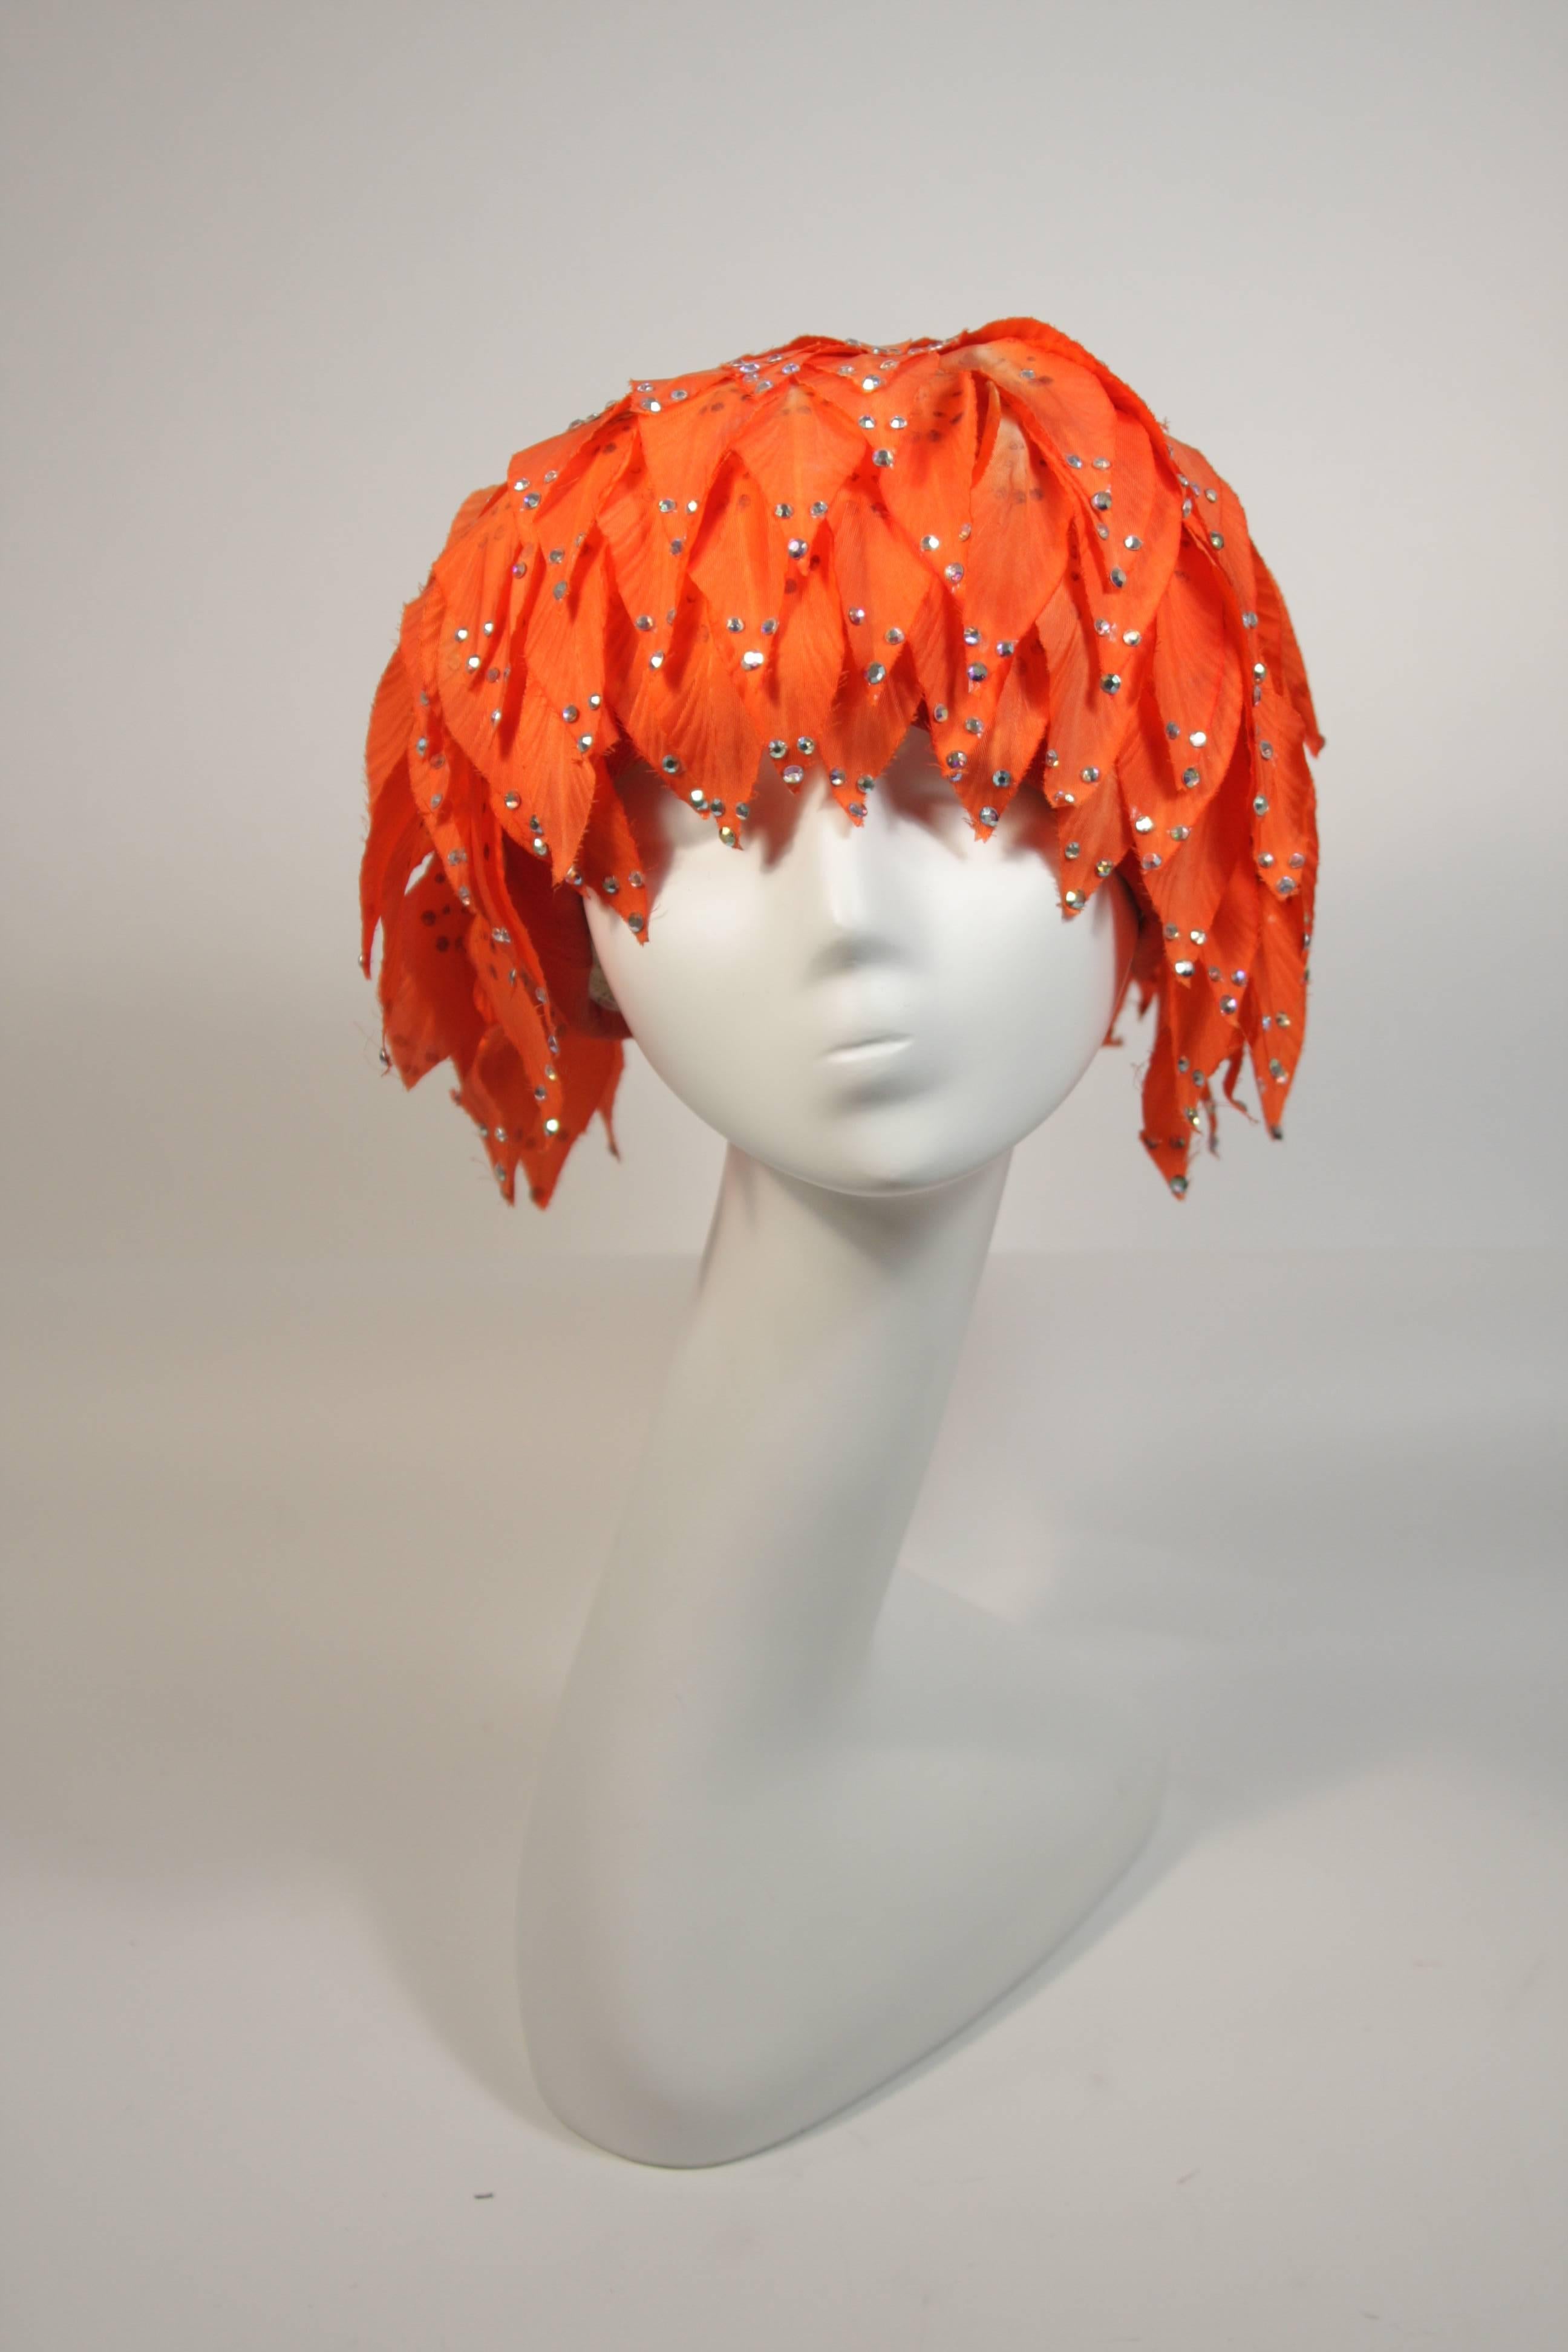 This Jack McConnell hat is composed of orange petals a-top a mesh base. The petals are adorned with rhinestones. The hat is in good condition for design inspiration and as a collectors item, there are missing rhinestones and discoloration (see